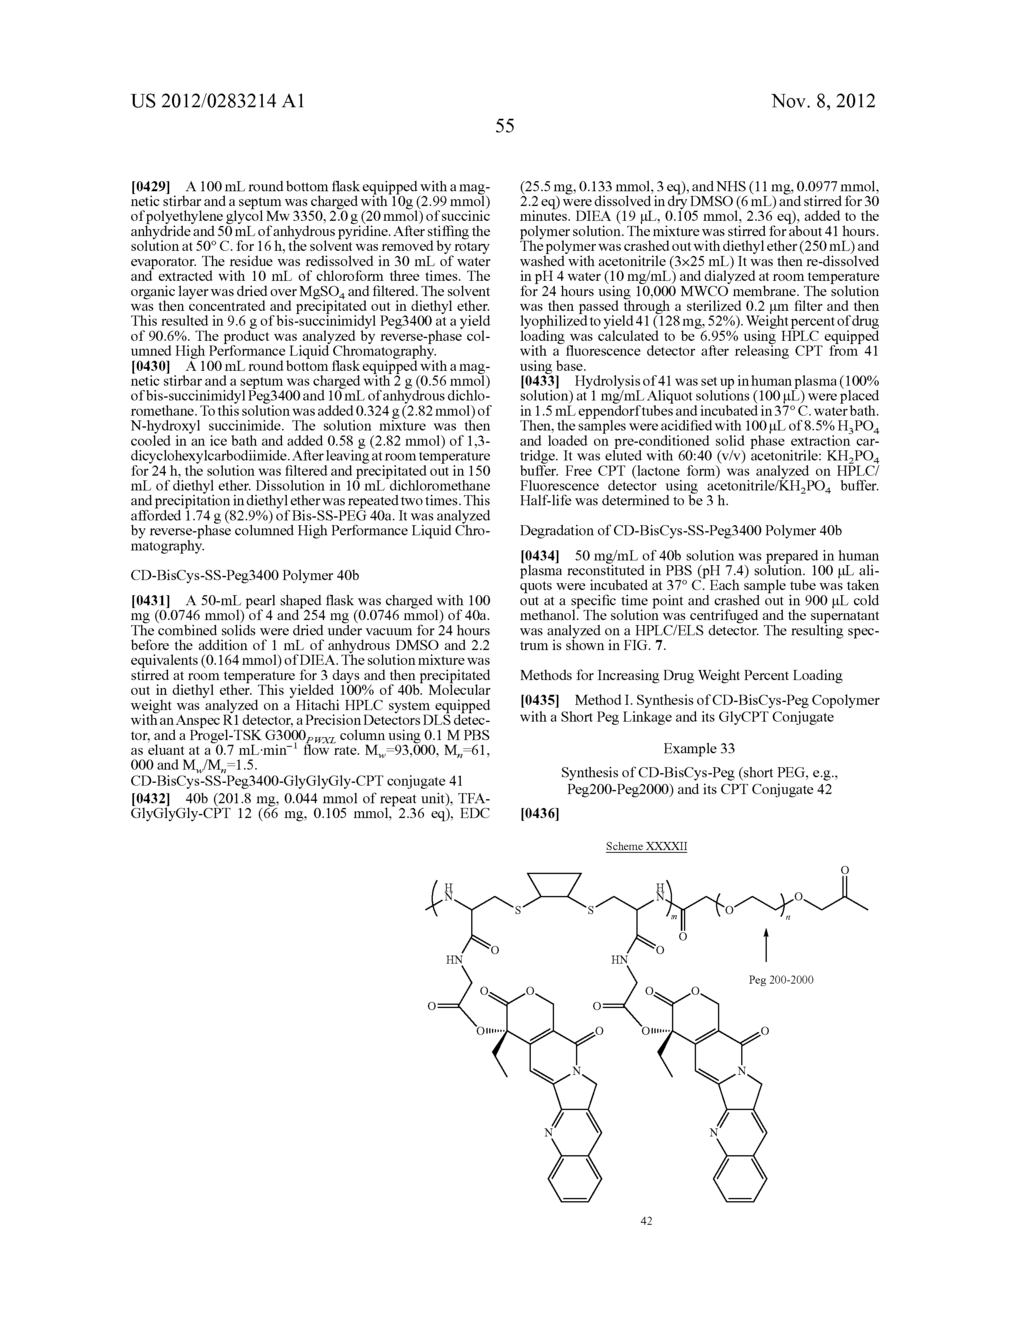 CYCLODEXTRIN-BASED POLYMERS FOR THERAPEUTICS DELIVERY - diagram, schematic, and image 67